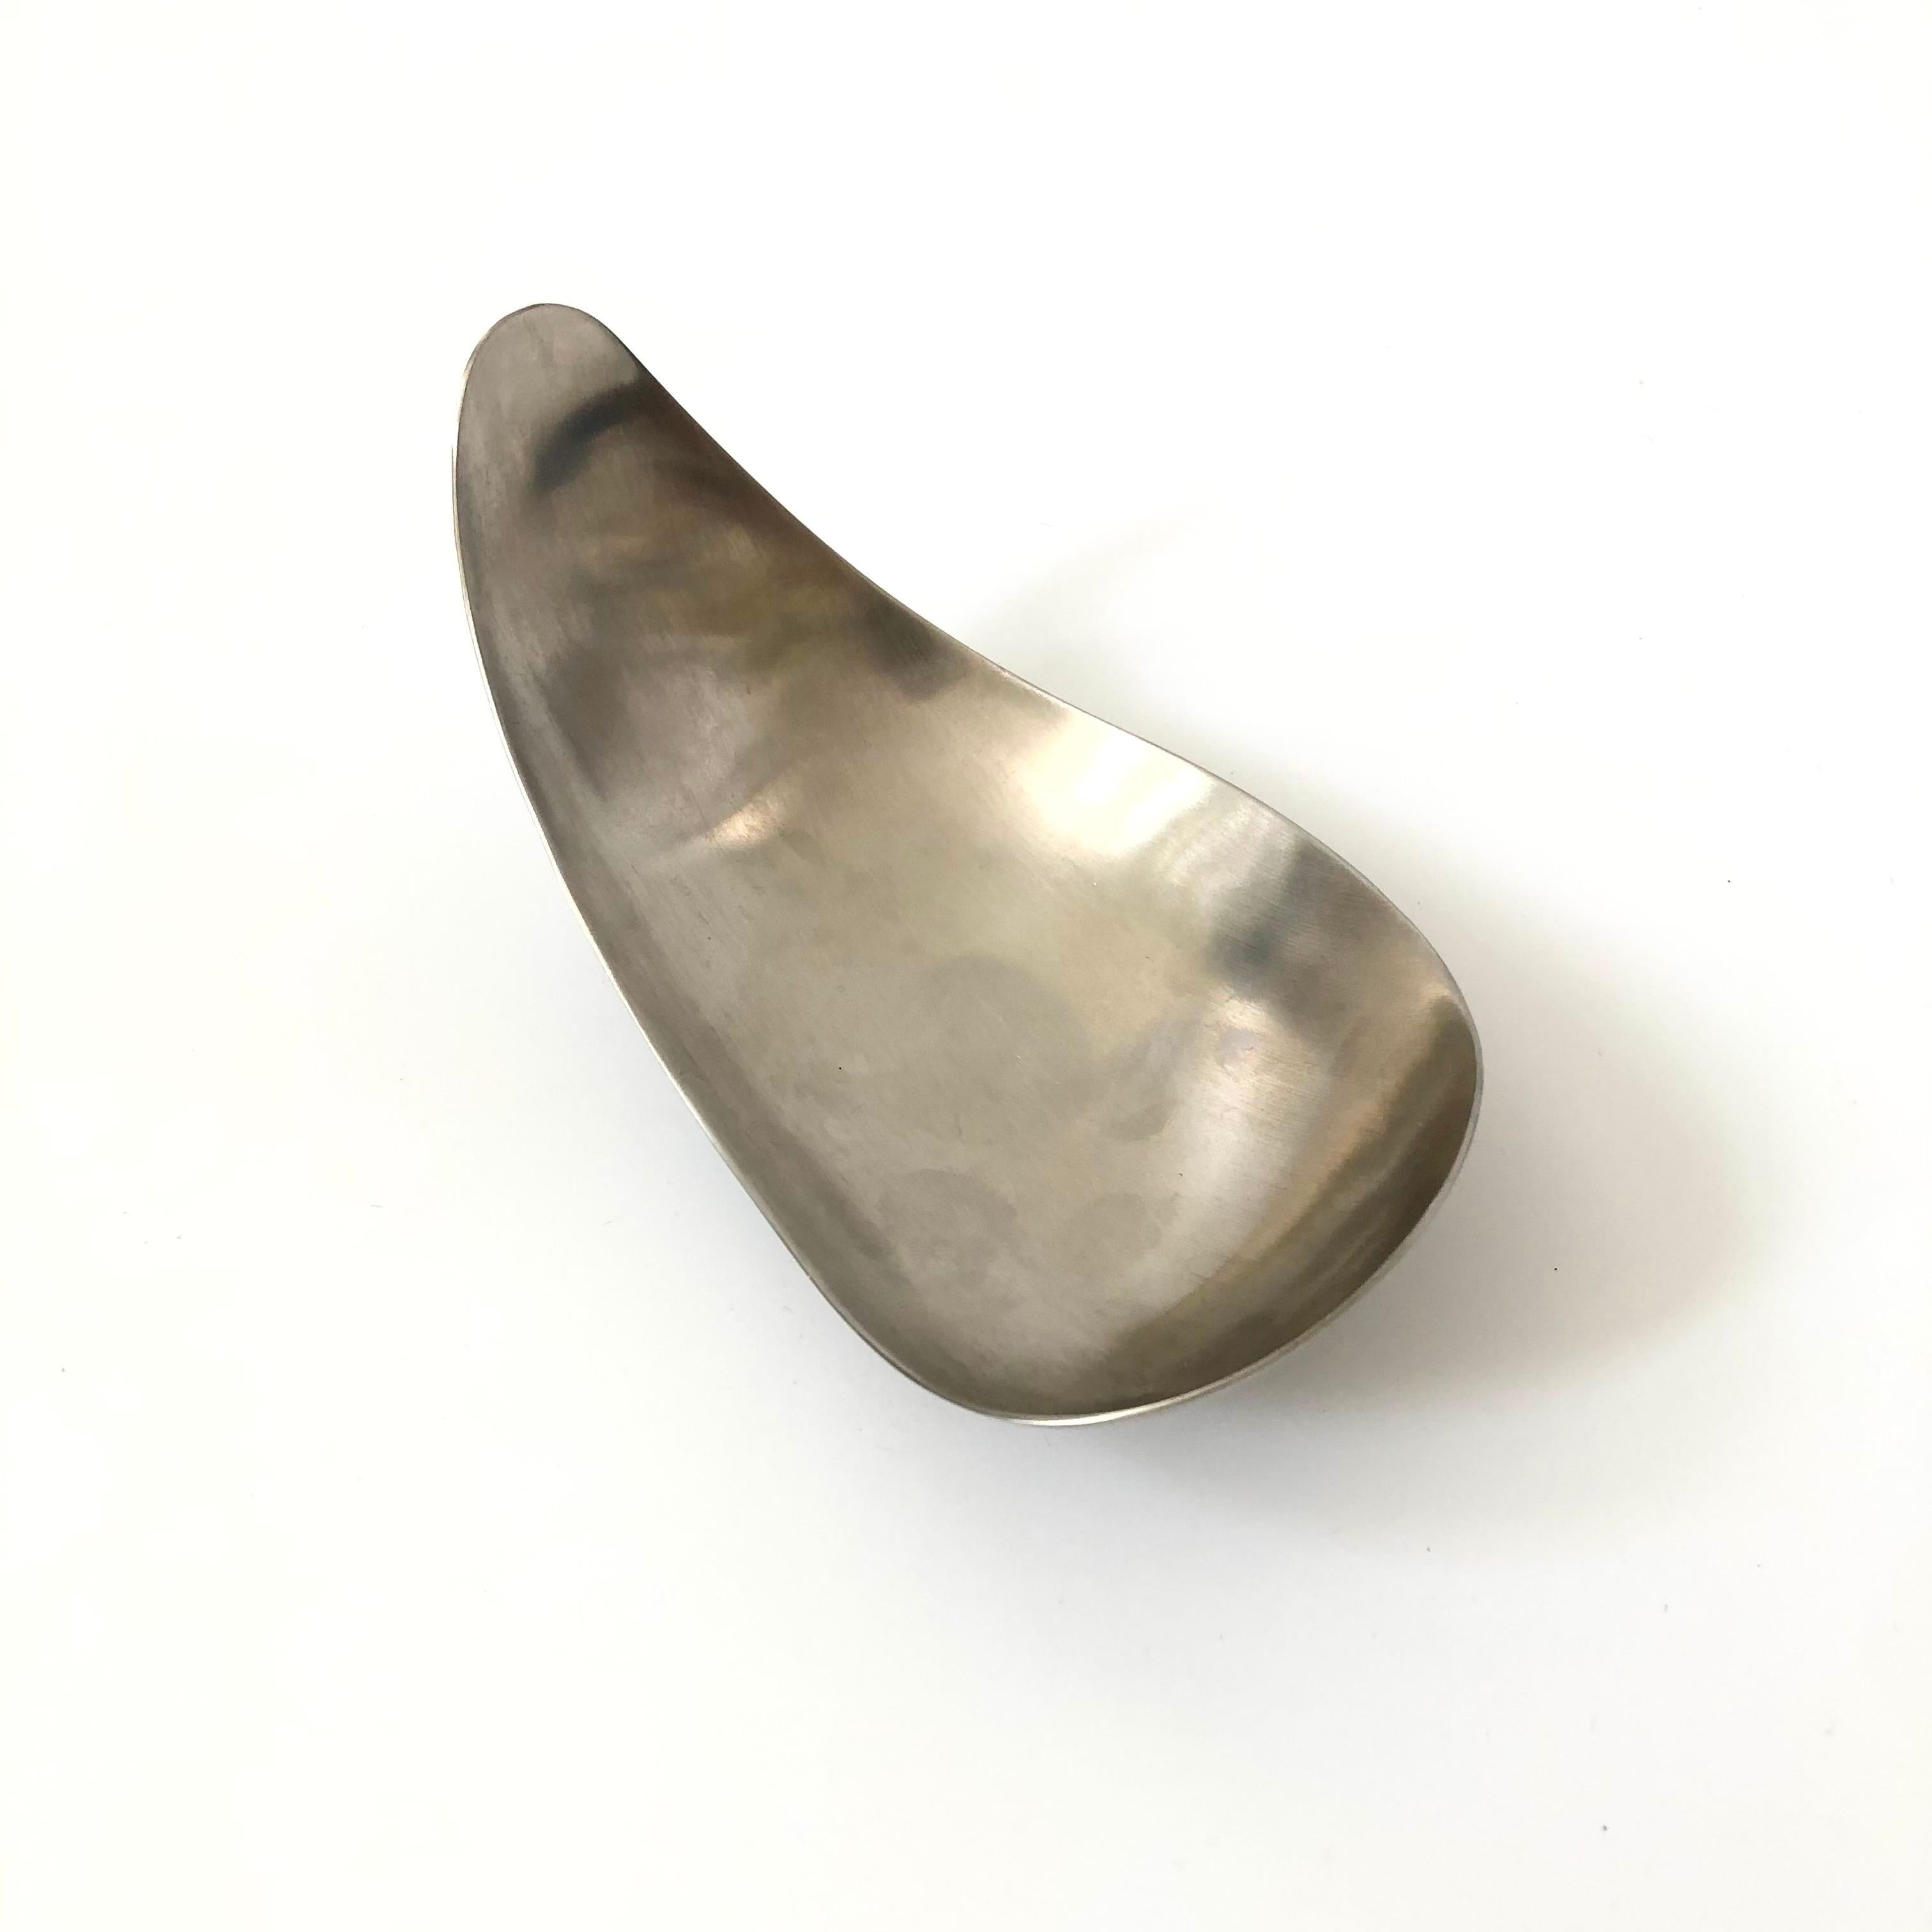 A mid century metal bowl designed by Helle Damkjær for Georg Jensen. Dramatic curved shape. Made of brushed stainless steel. Marked on the base.

